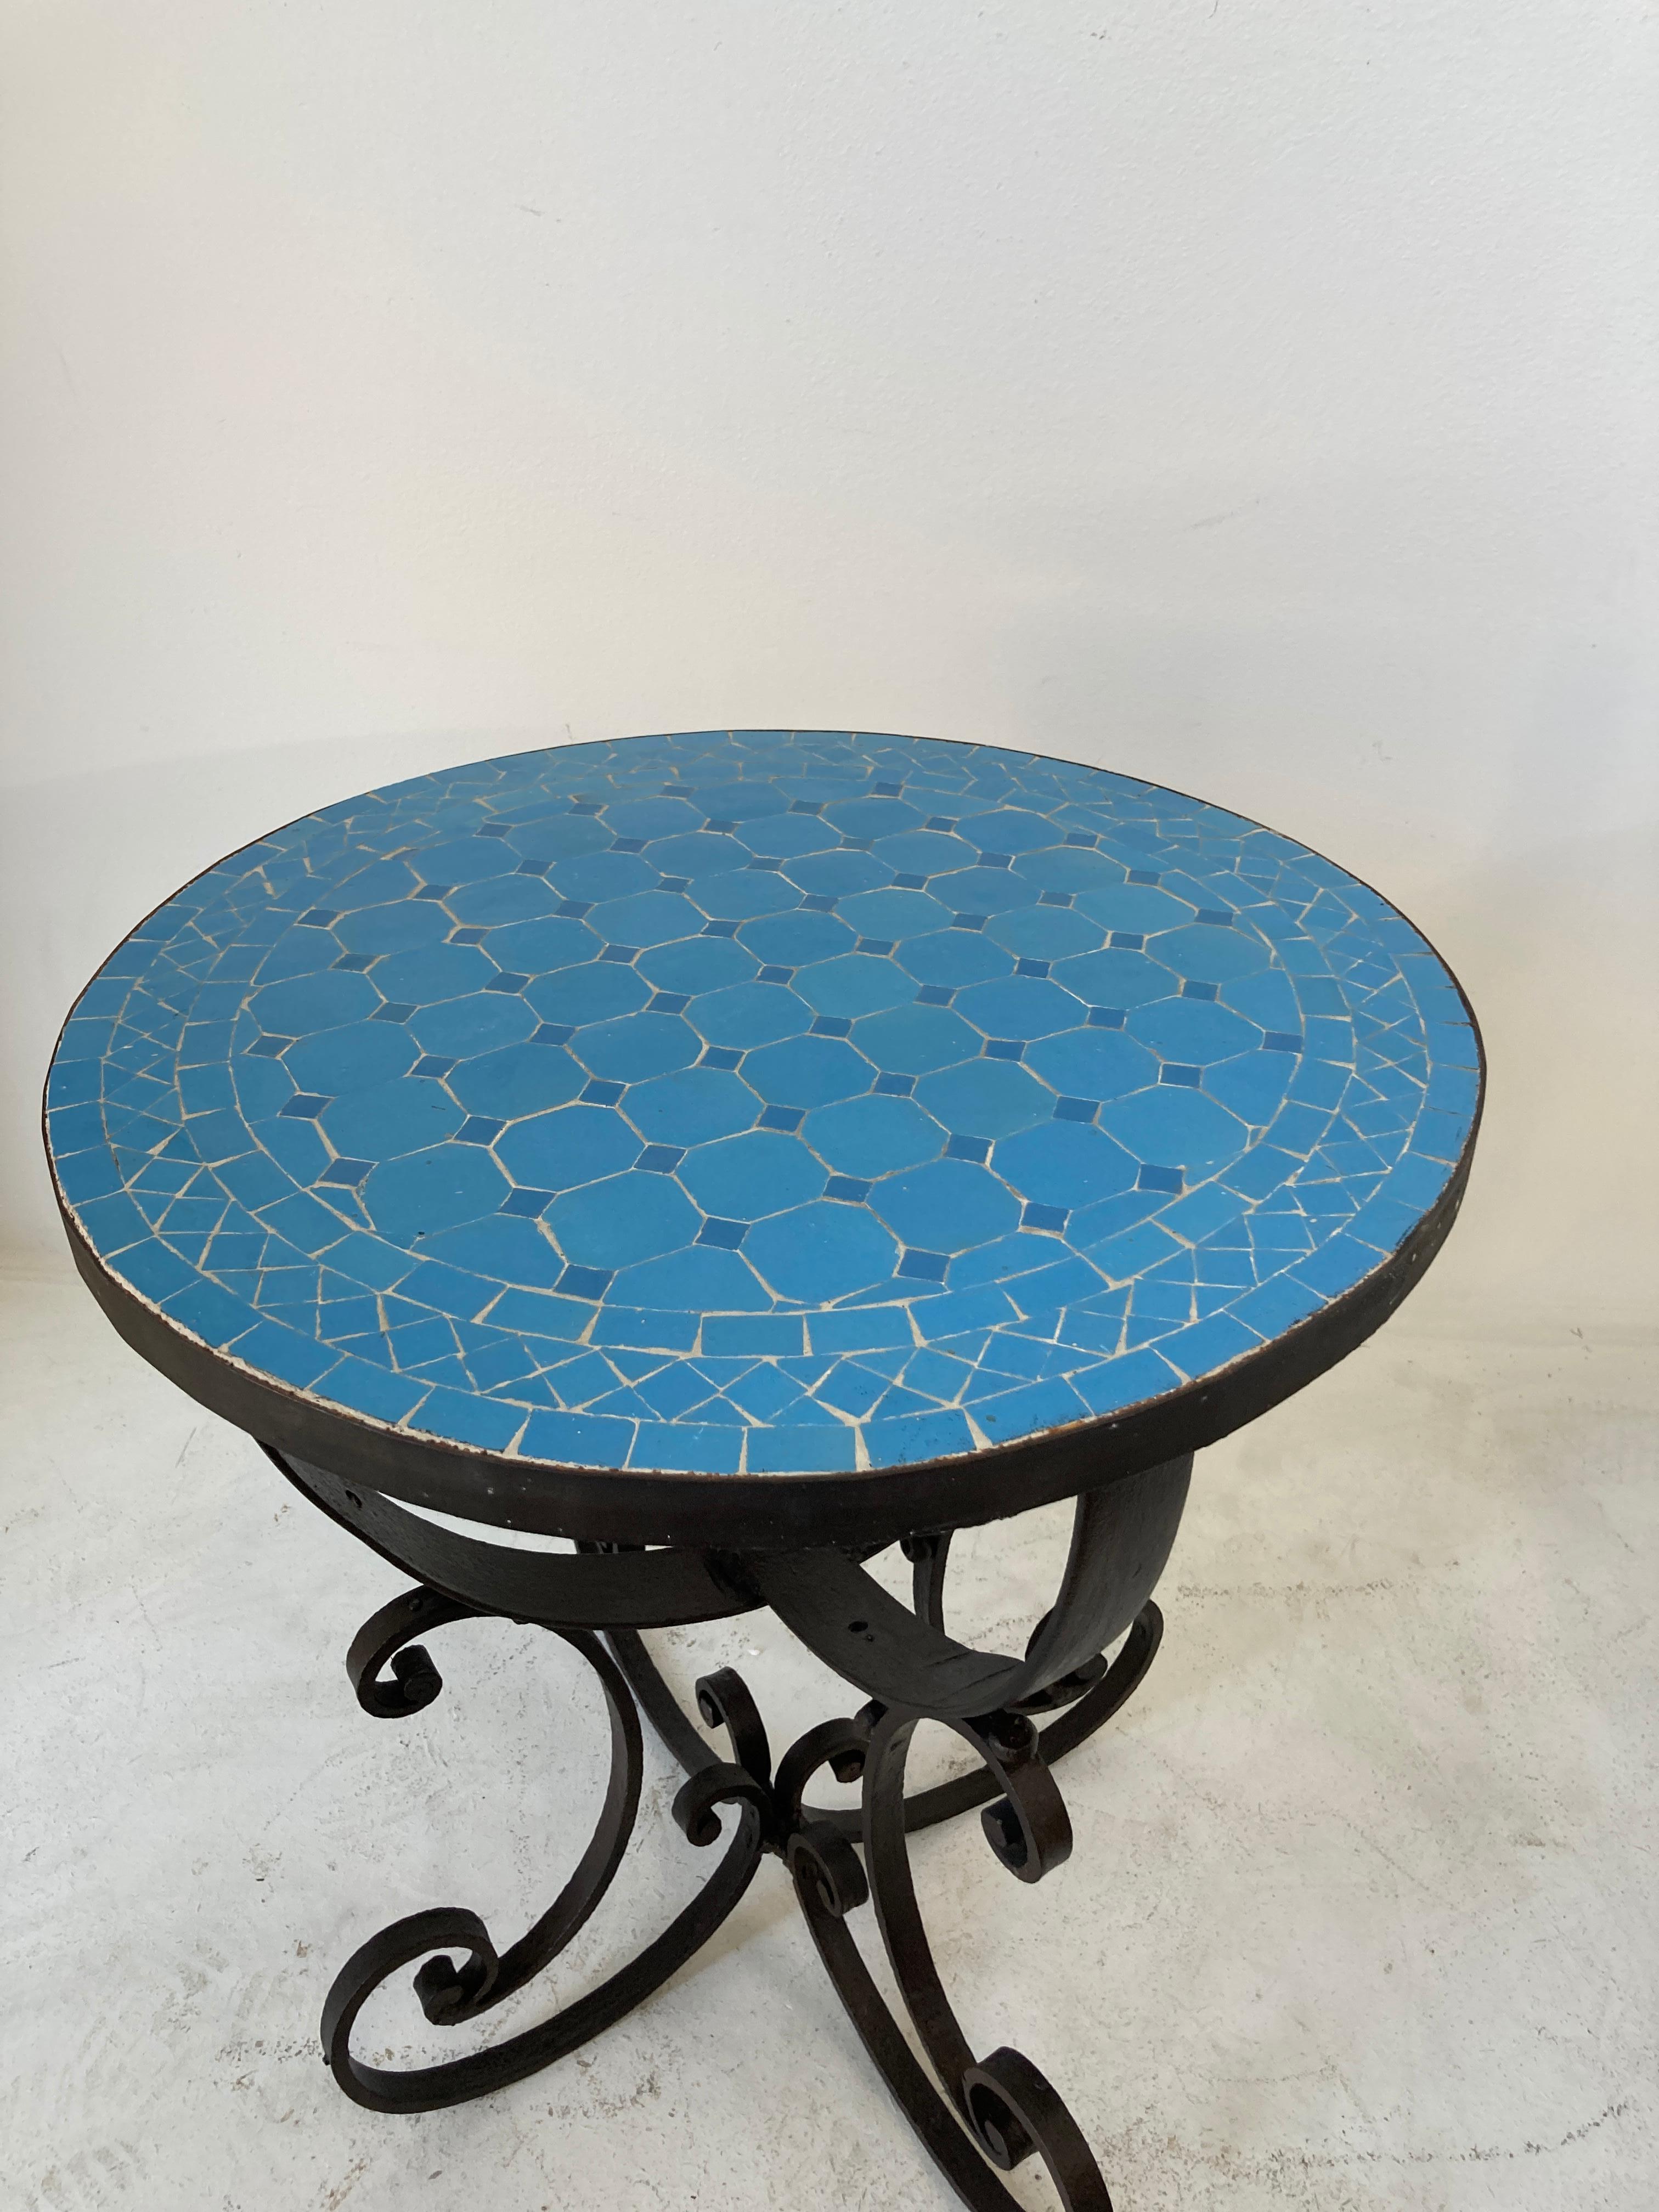 Moroccan Moorish mosaic tile table on wrought iron base.
Handmade by expert artisans in Fez, Morocco using reclaimed old glazed blue colors tiles inlaid in concrete using reclaimed old glazed tiles and making beautiful geometrical designs, colors